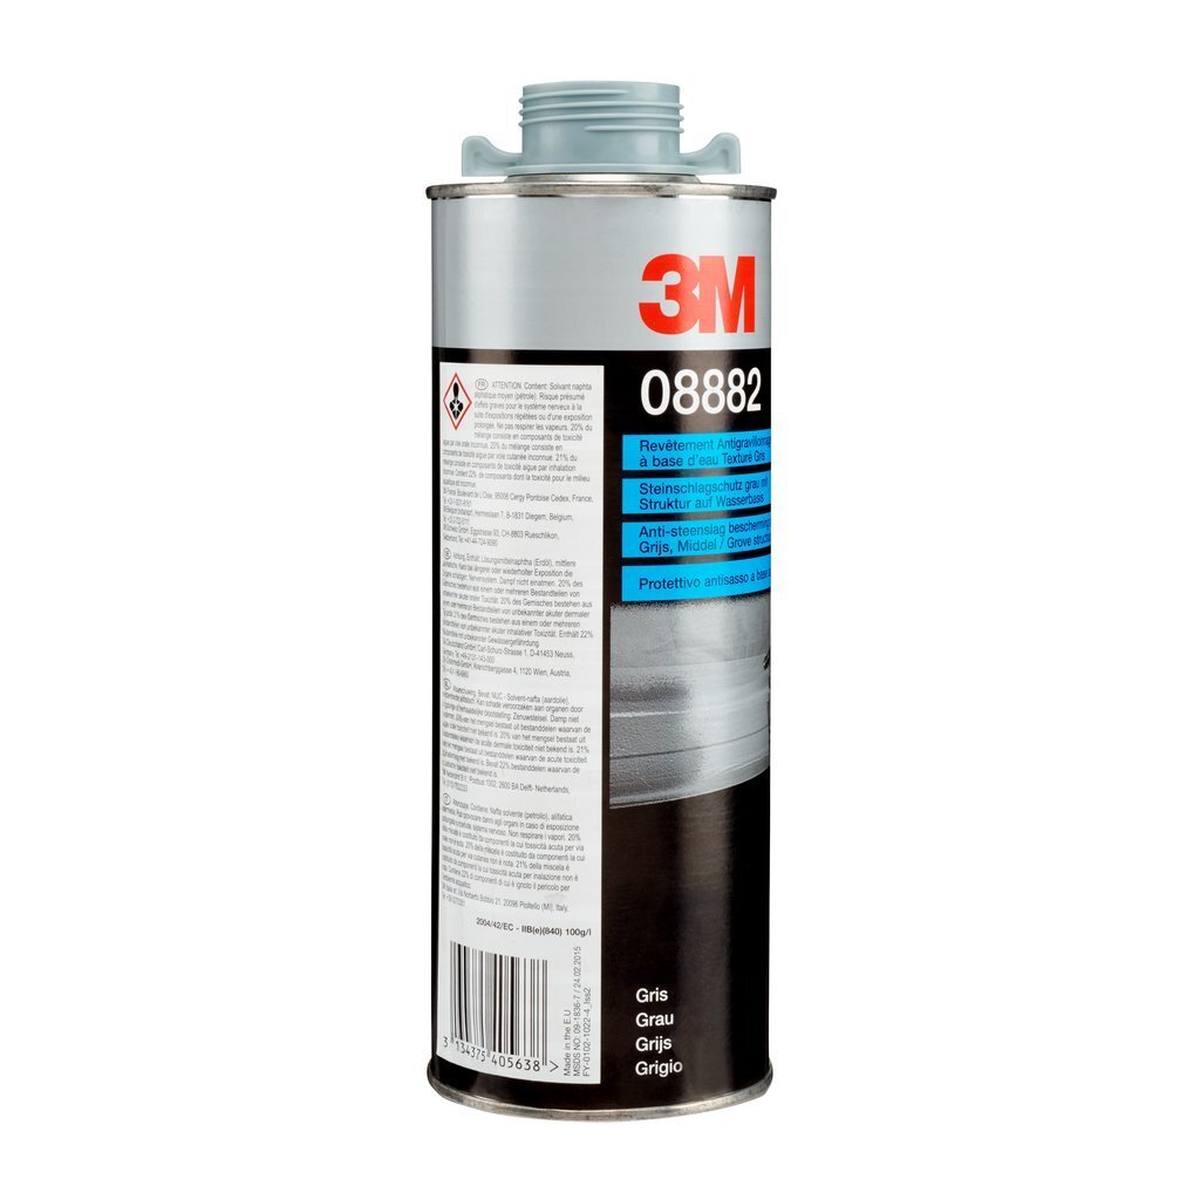 3M stone chip protection water-based / with structure, gray, 1kg, #08882